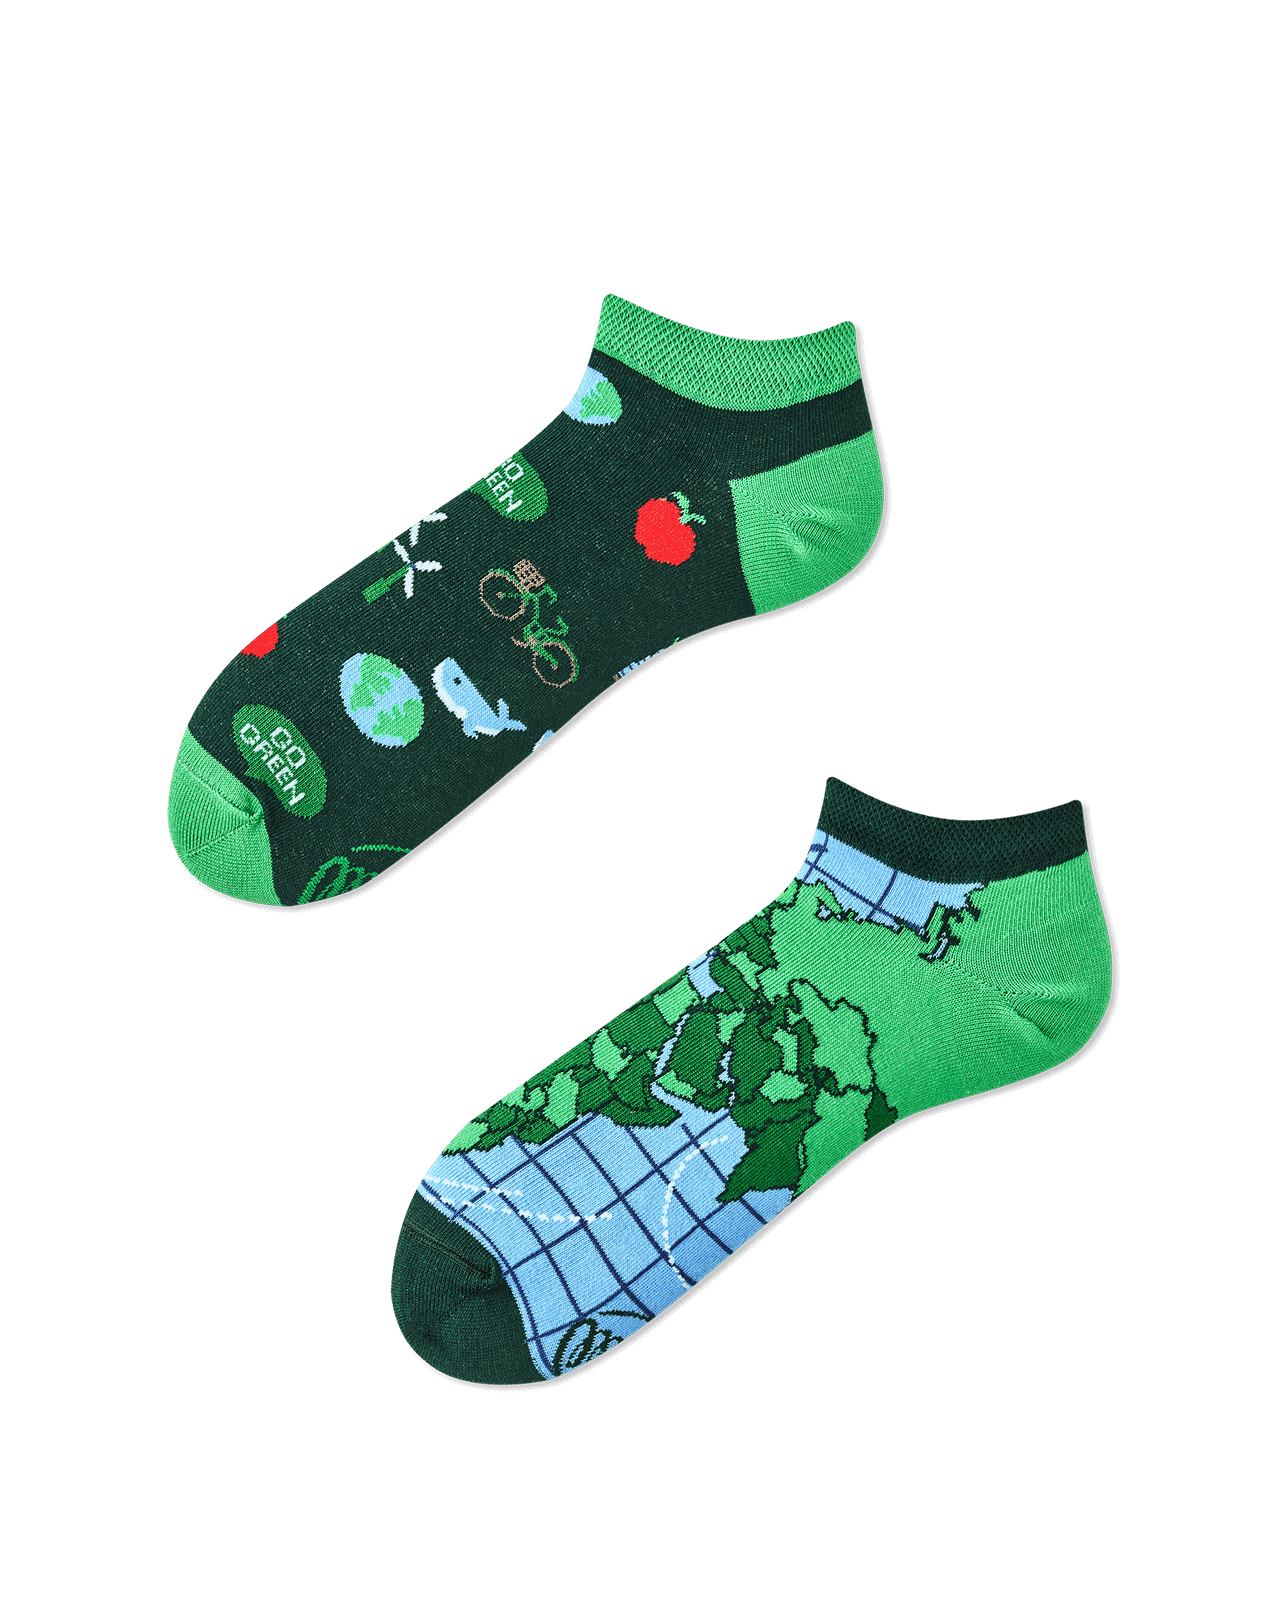 SAVE THE PLANET LOW - Eco low socks